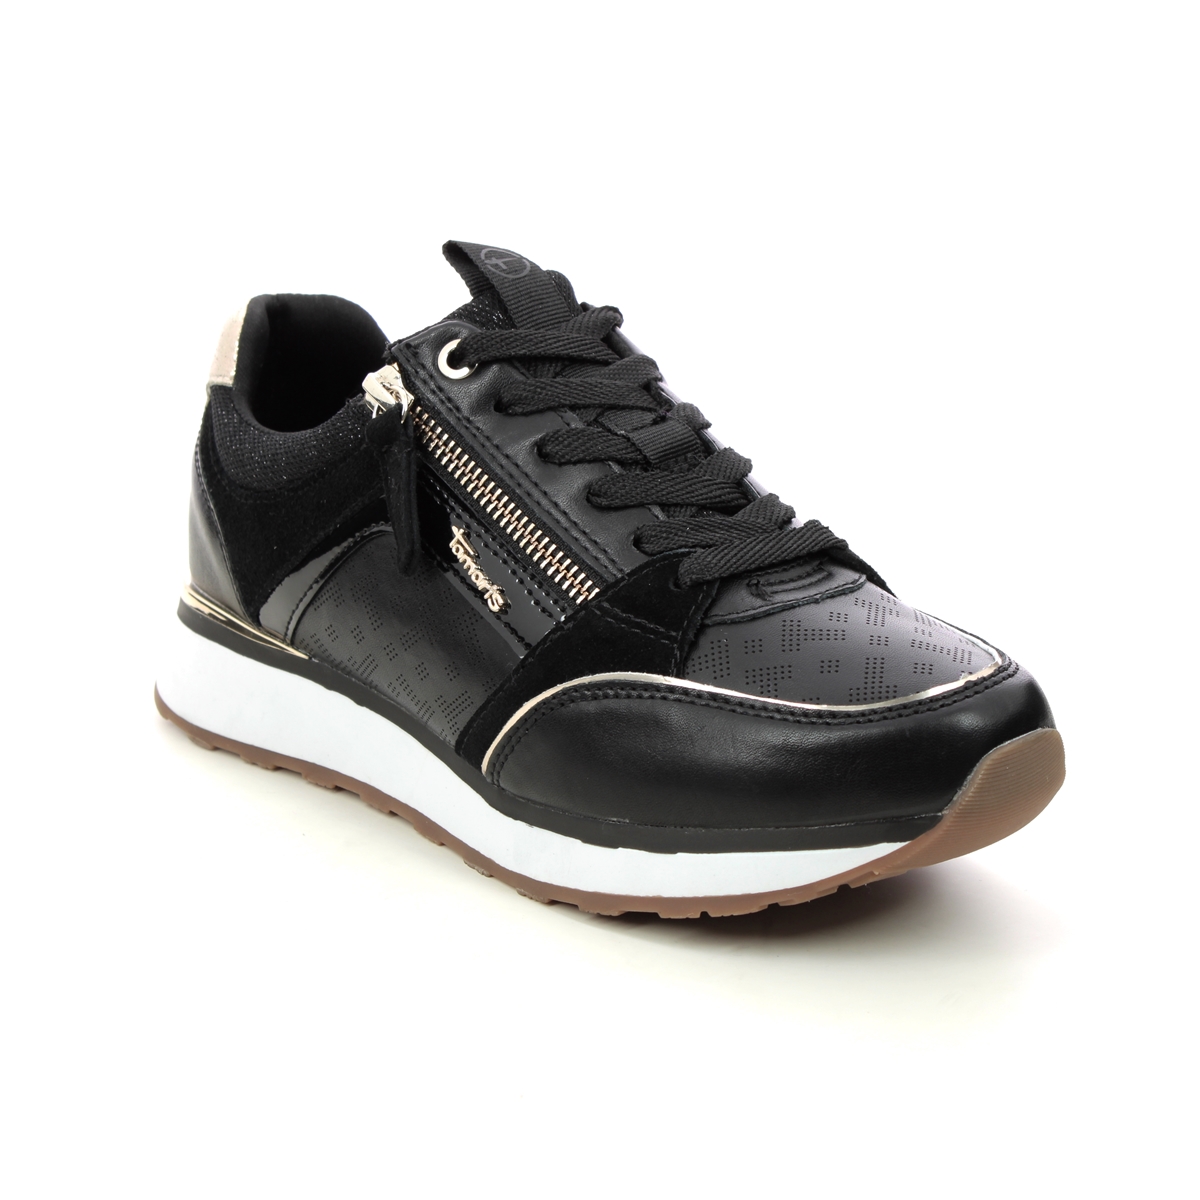 Tamaris Tajavapo Zip Black gold Womens trainers 23726-20-048 in a Plain Leather and Man-made in Size 40